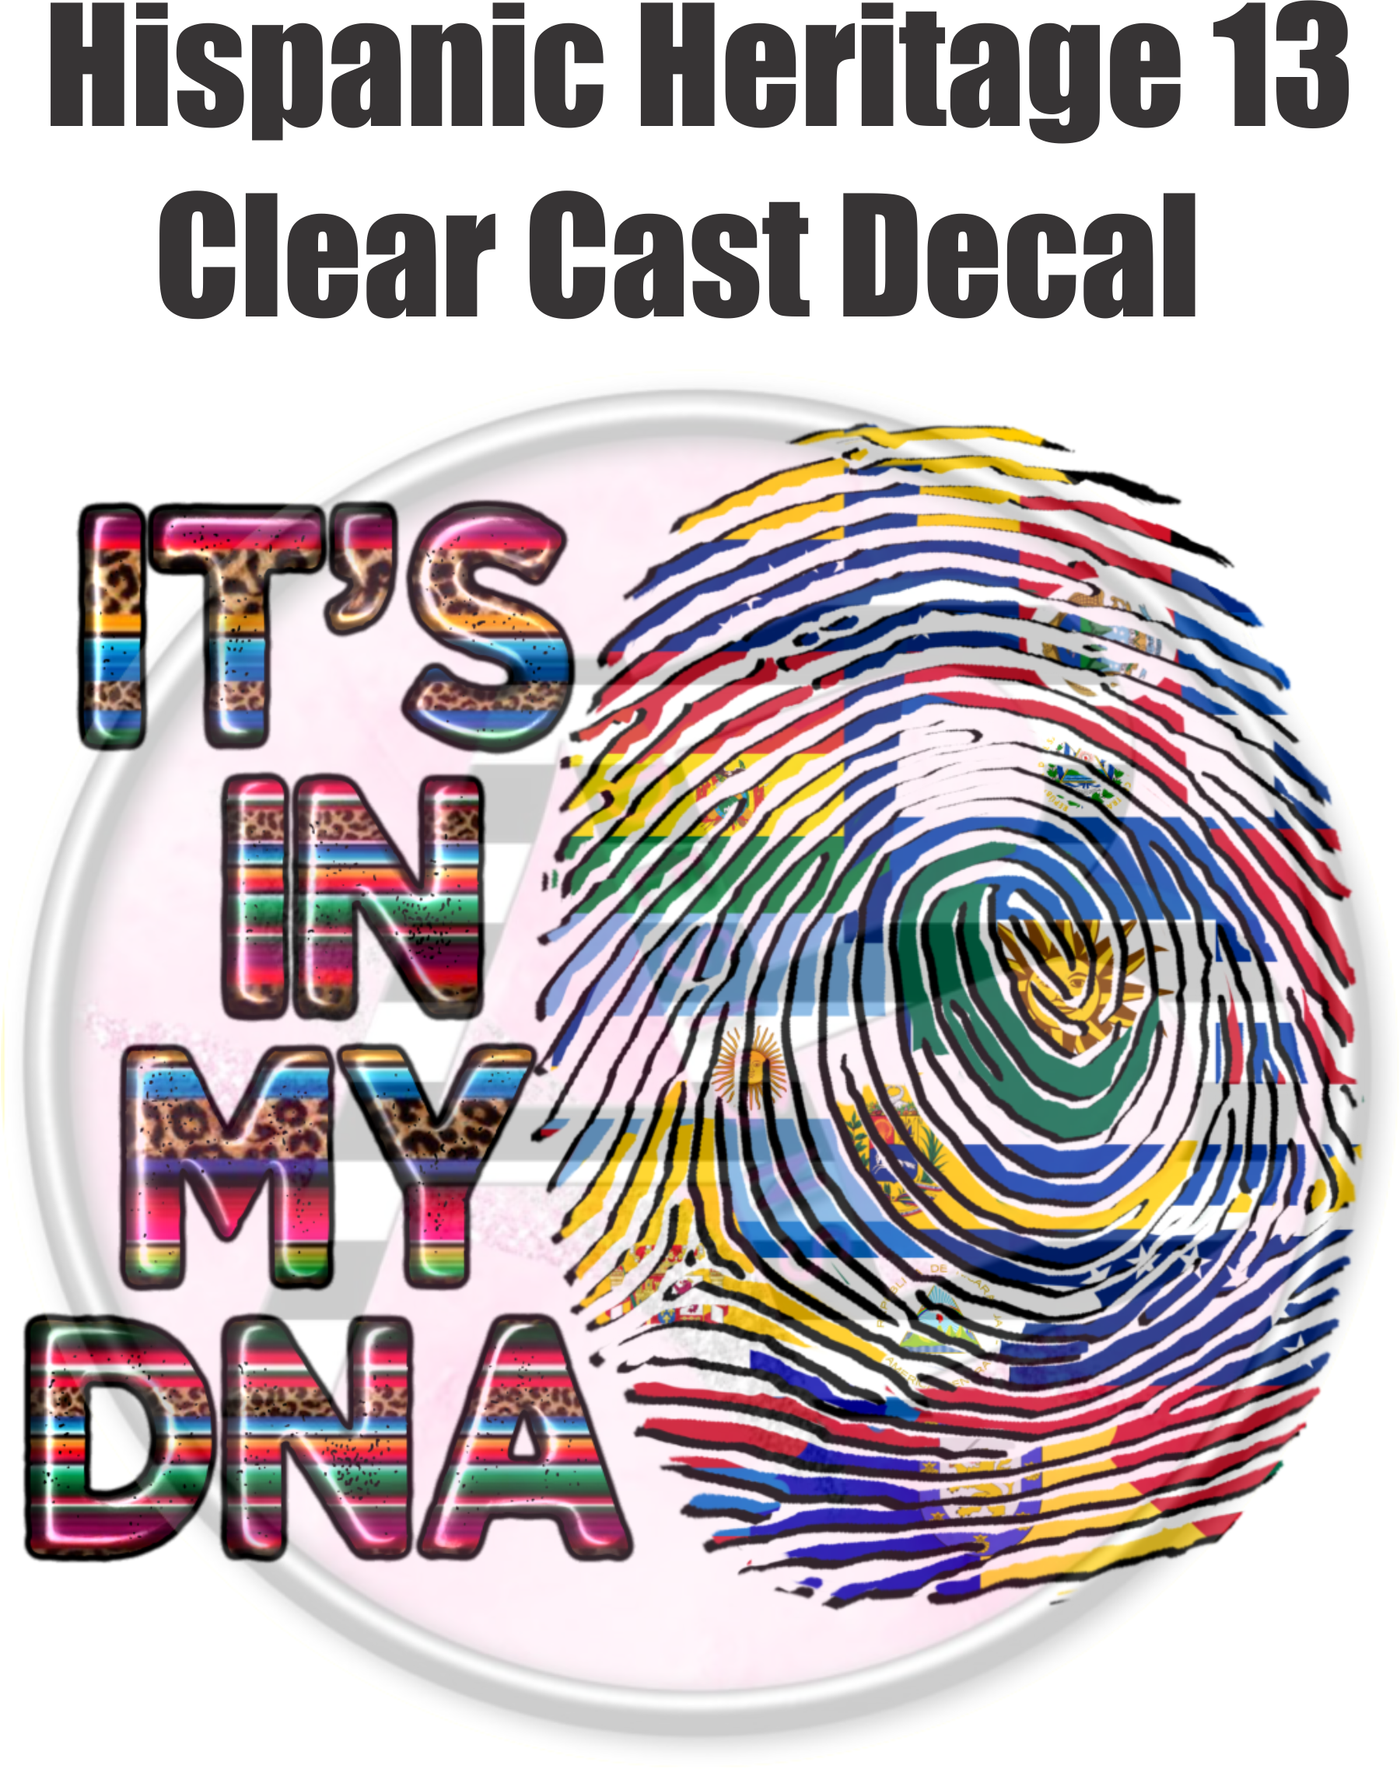 Hispanic Heritage 13 - Clear Cast Decal